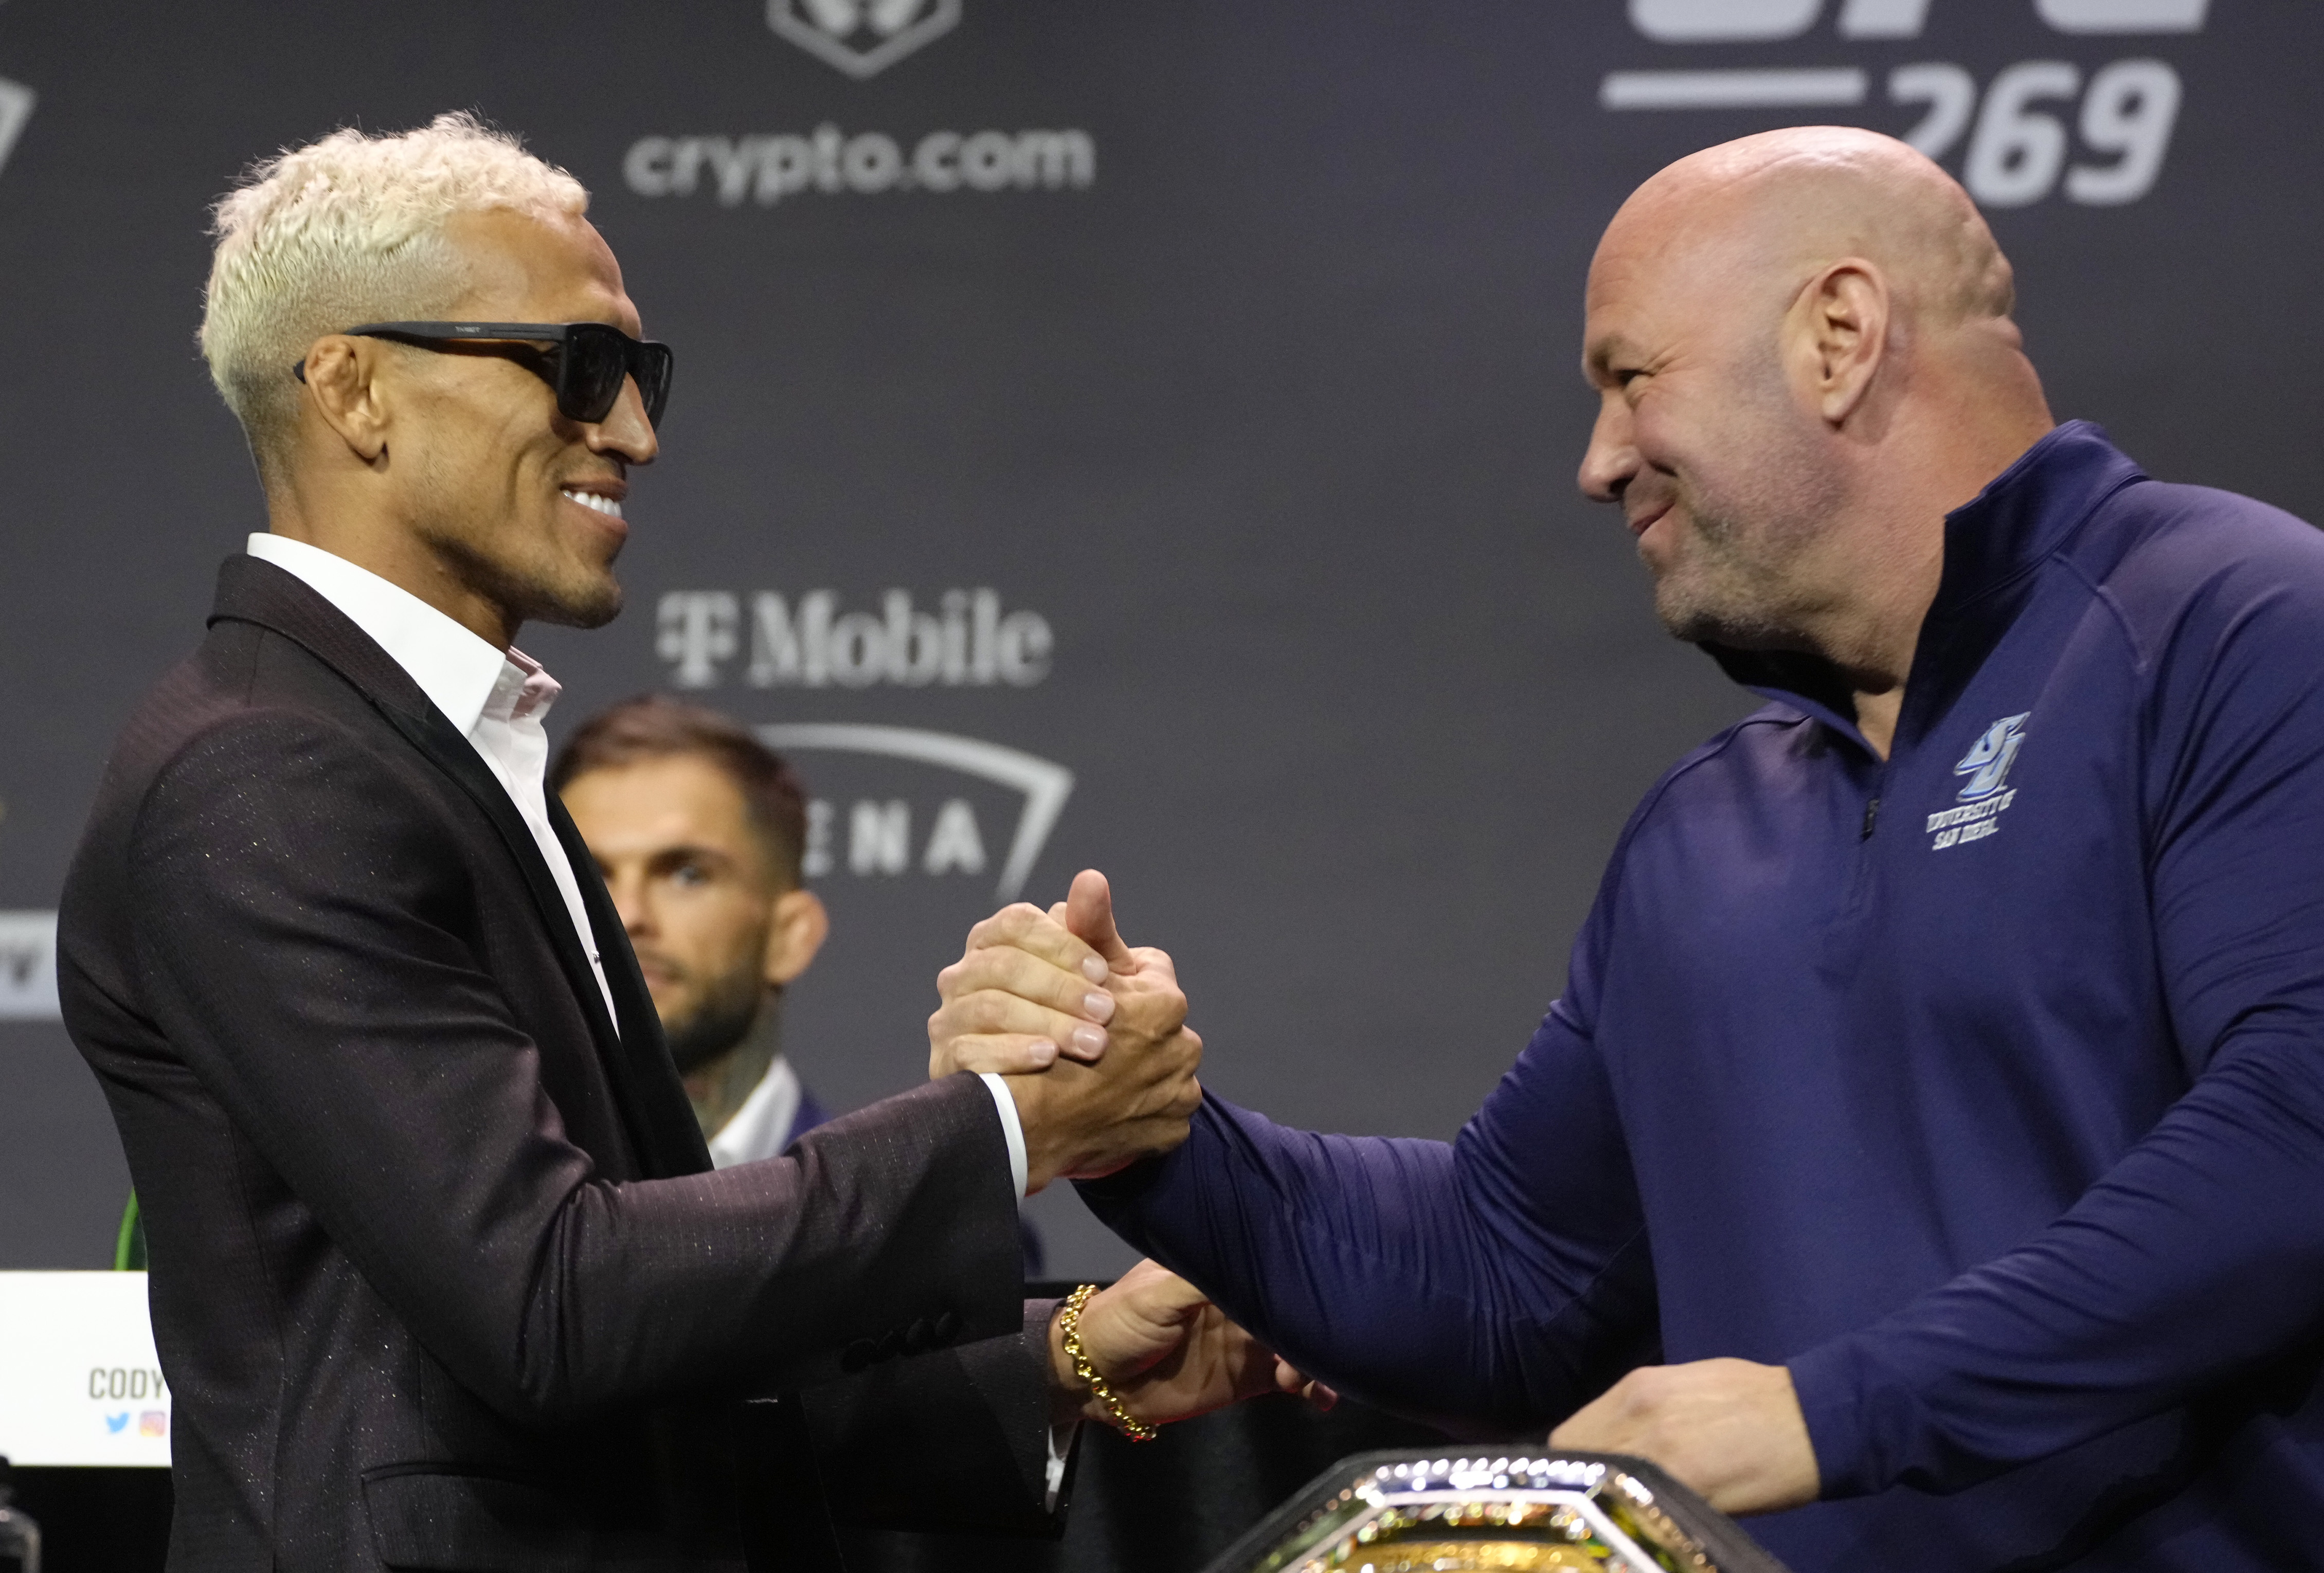 UFC President Dana White with Charles Oliveira at the UFC 269 press conference.